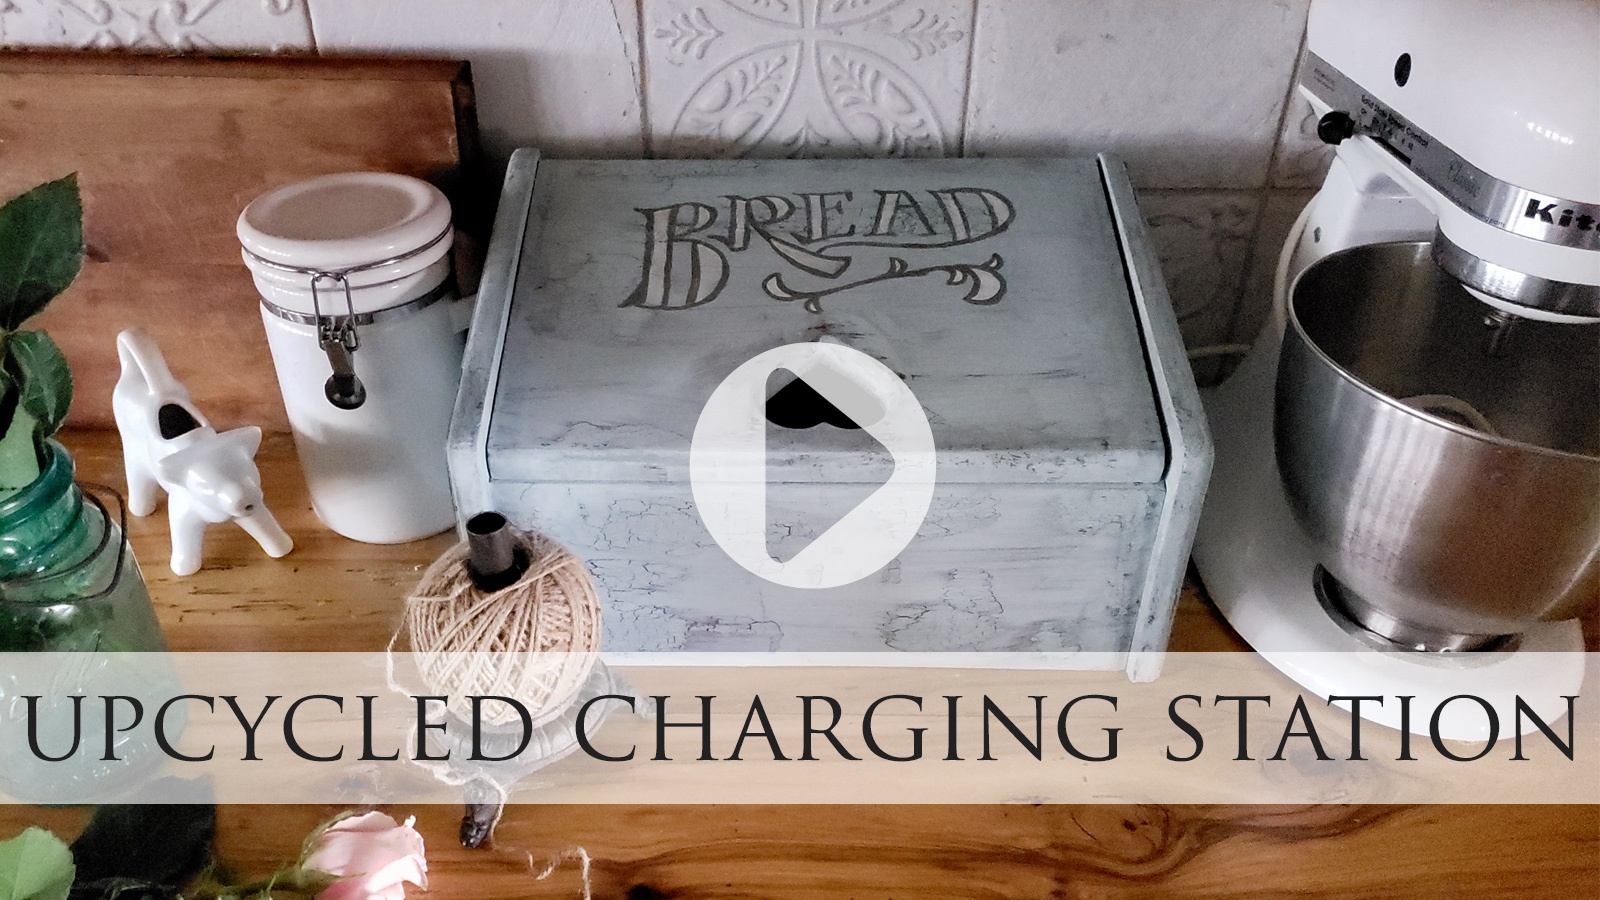 Upcycled Charging Station from Vintage Bread Box by Larissa of Prodigal Pieces | prodigalpieces.com #prodigalpieces